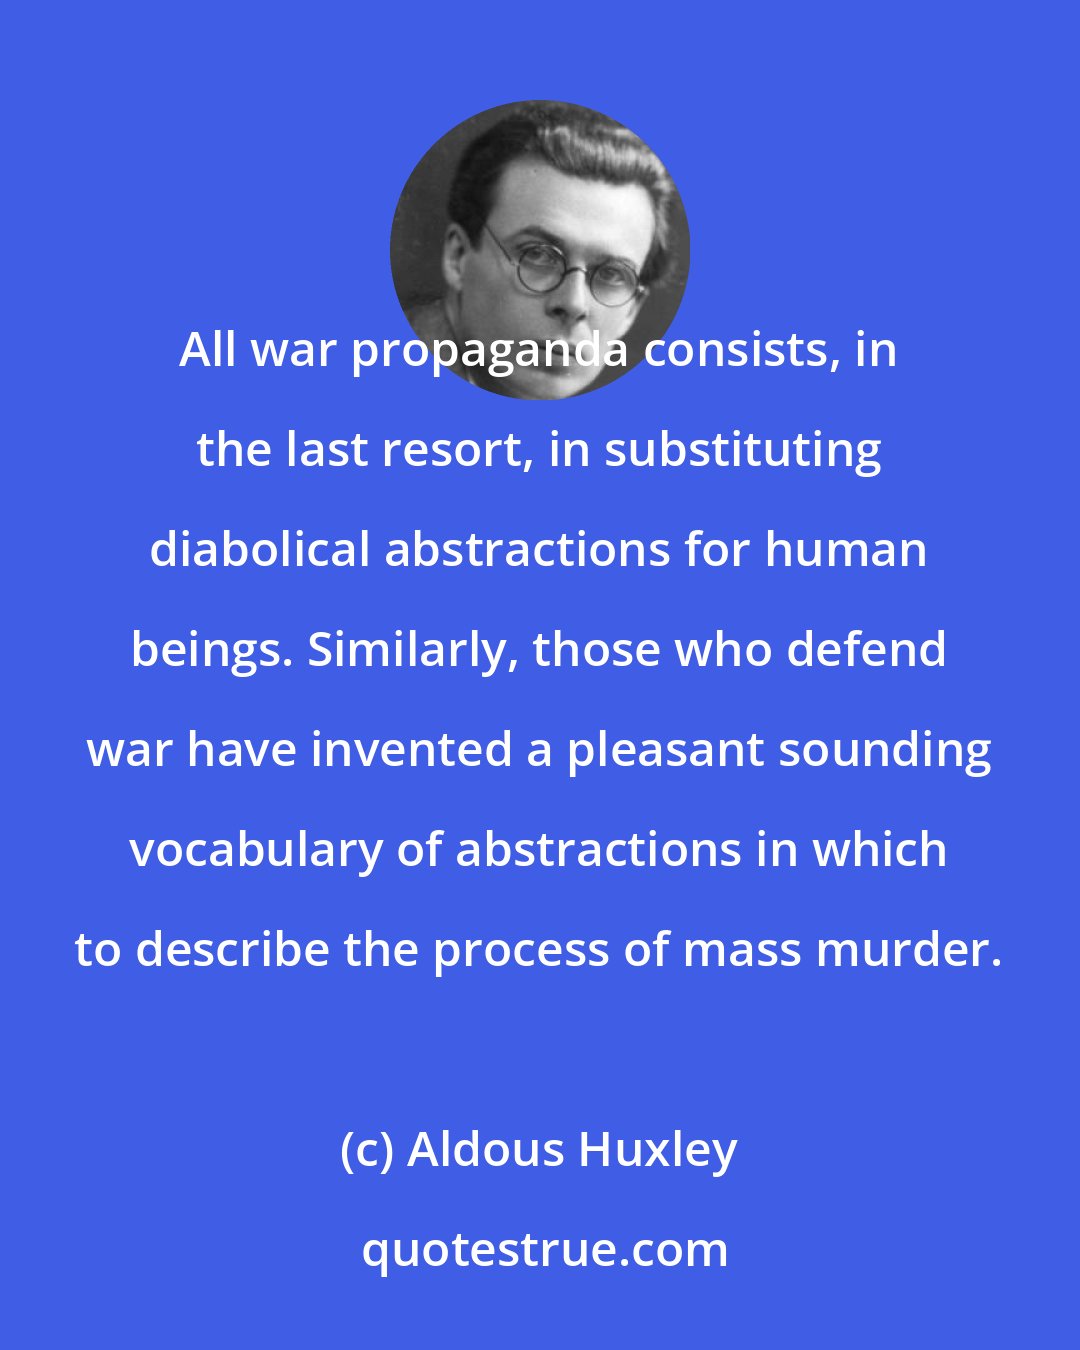 Aldous Huxley: All war propaganda consists, in the last resort, in substituting diabolical abstractions for human beings. Similarly, those who defend war have invented a pleasant sounding vocabulary of abstractions in which to describe the process of mass murder.